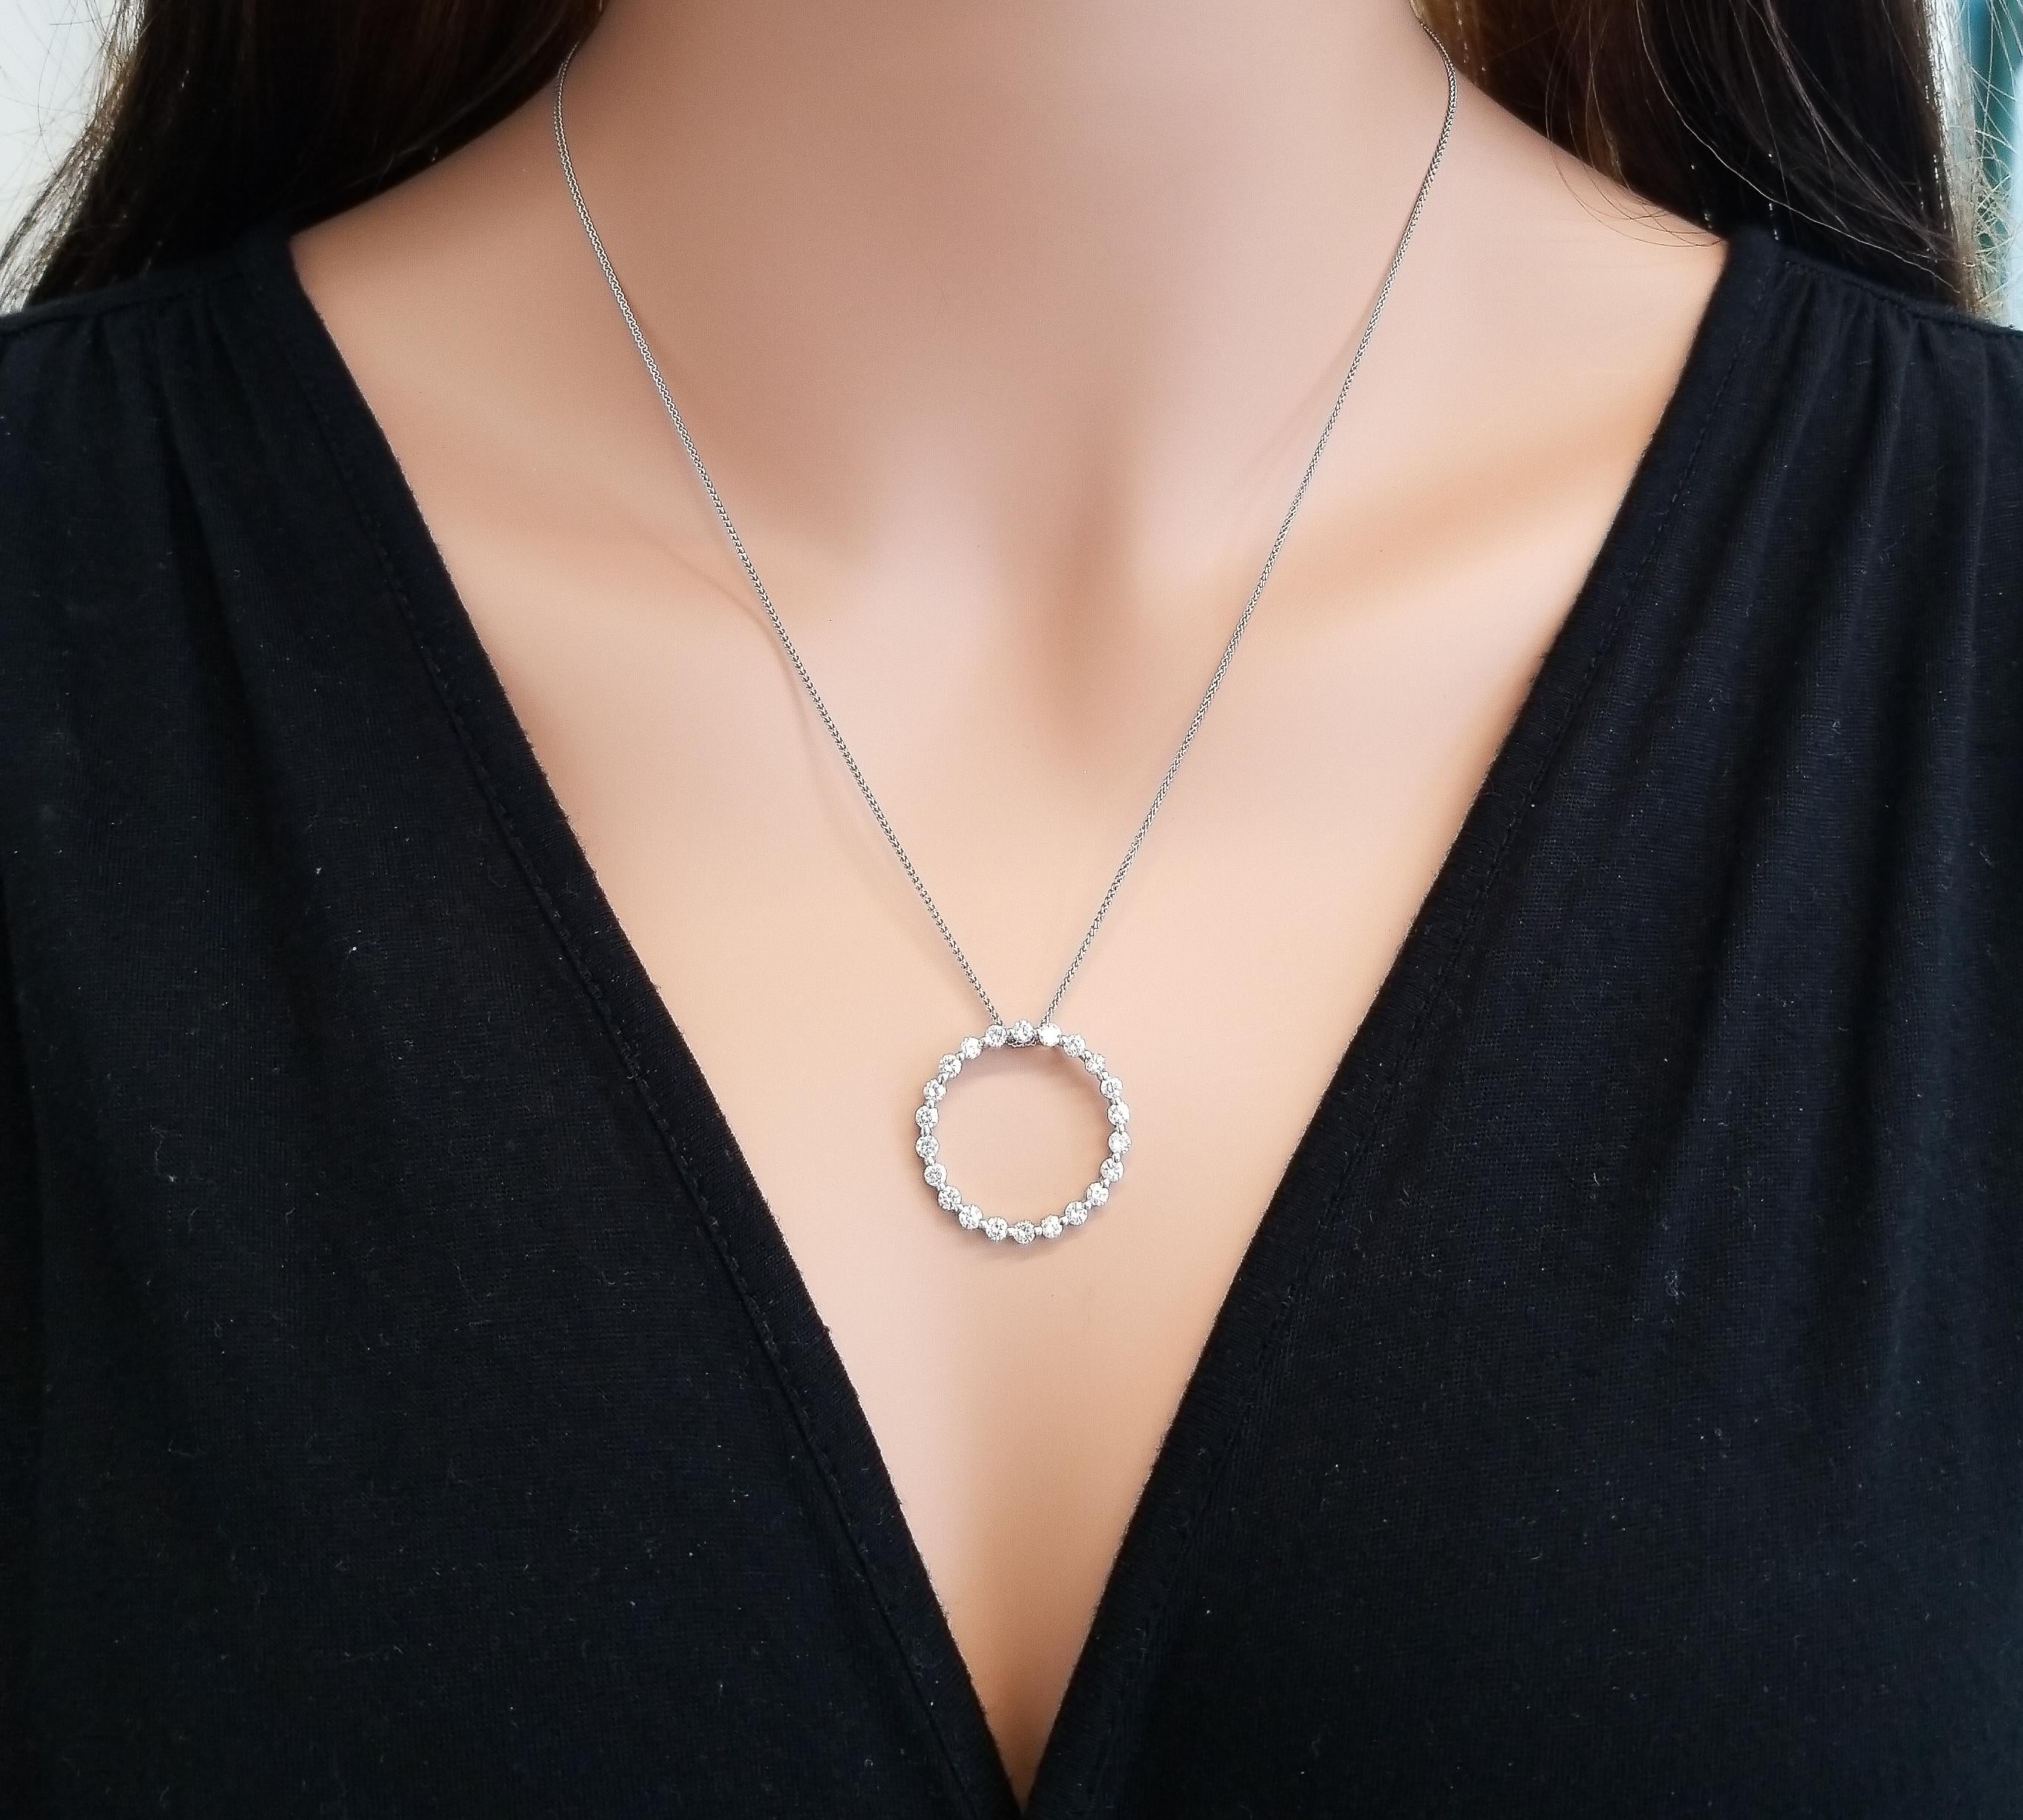 This circle pendant is set ablaze with fiery round brilliant diamonds. This diamond classic is subtle yet sophisticated at the same time. Wear it with your favorite casual attire, or your dressiest dress. The pendant features 1.15 carat illuminating